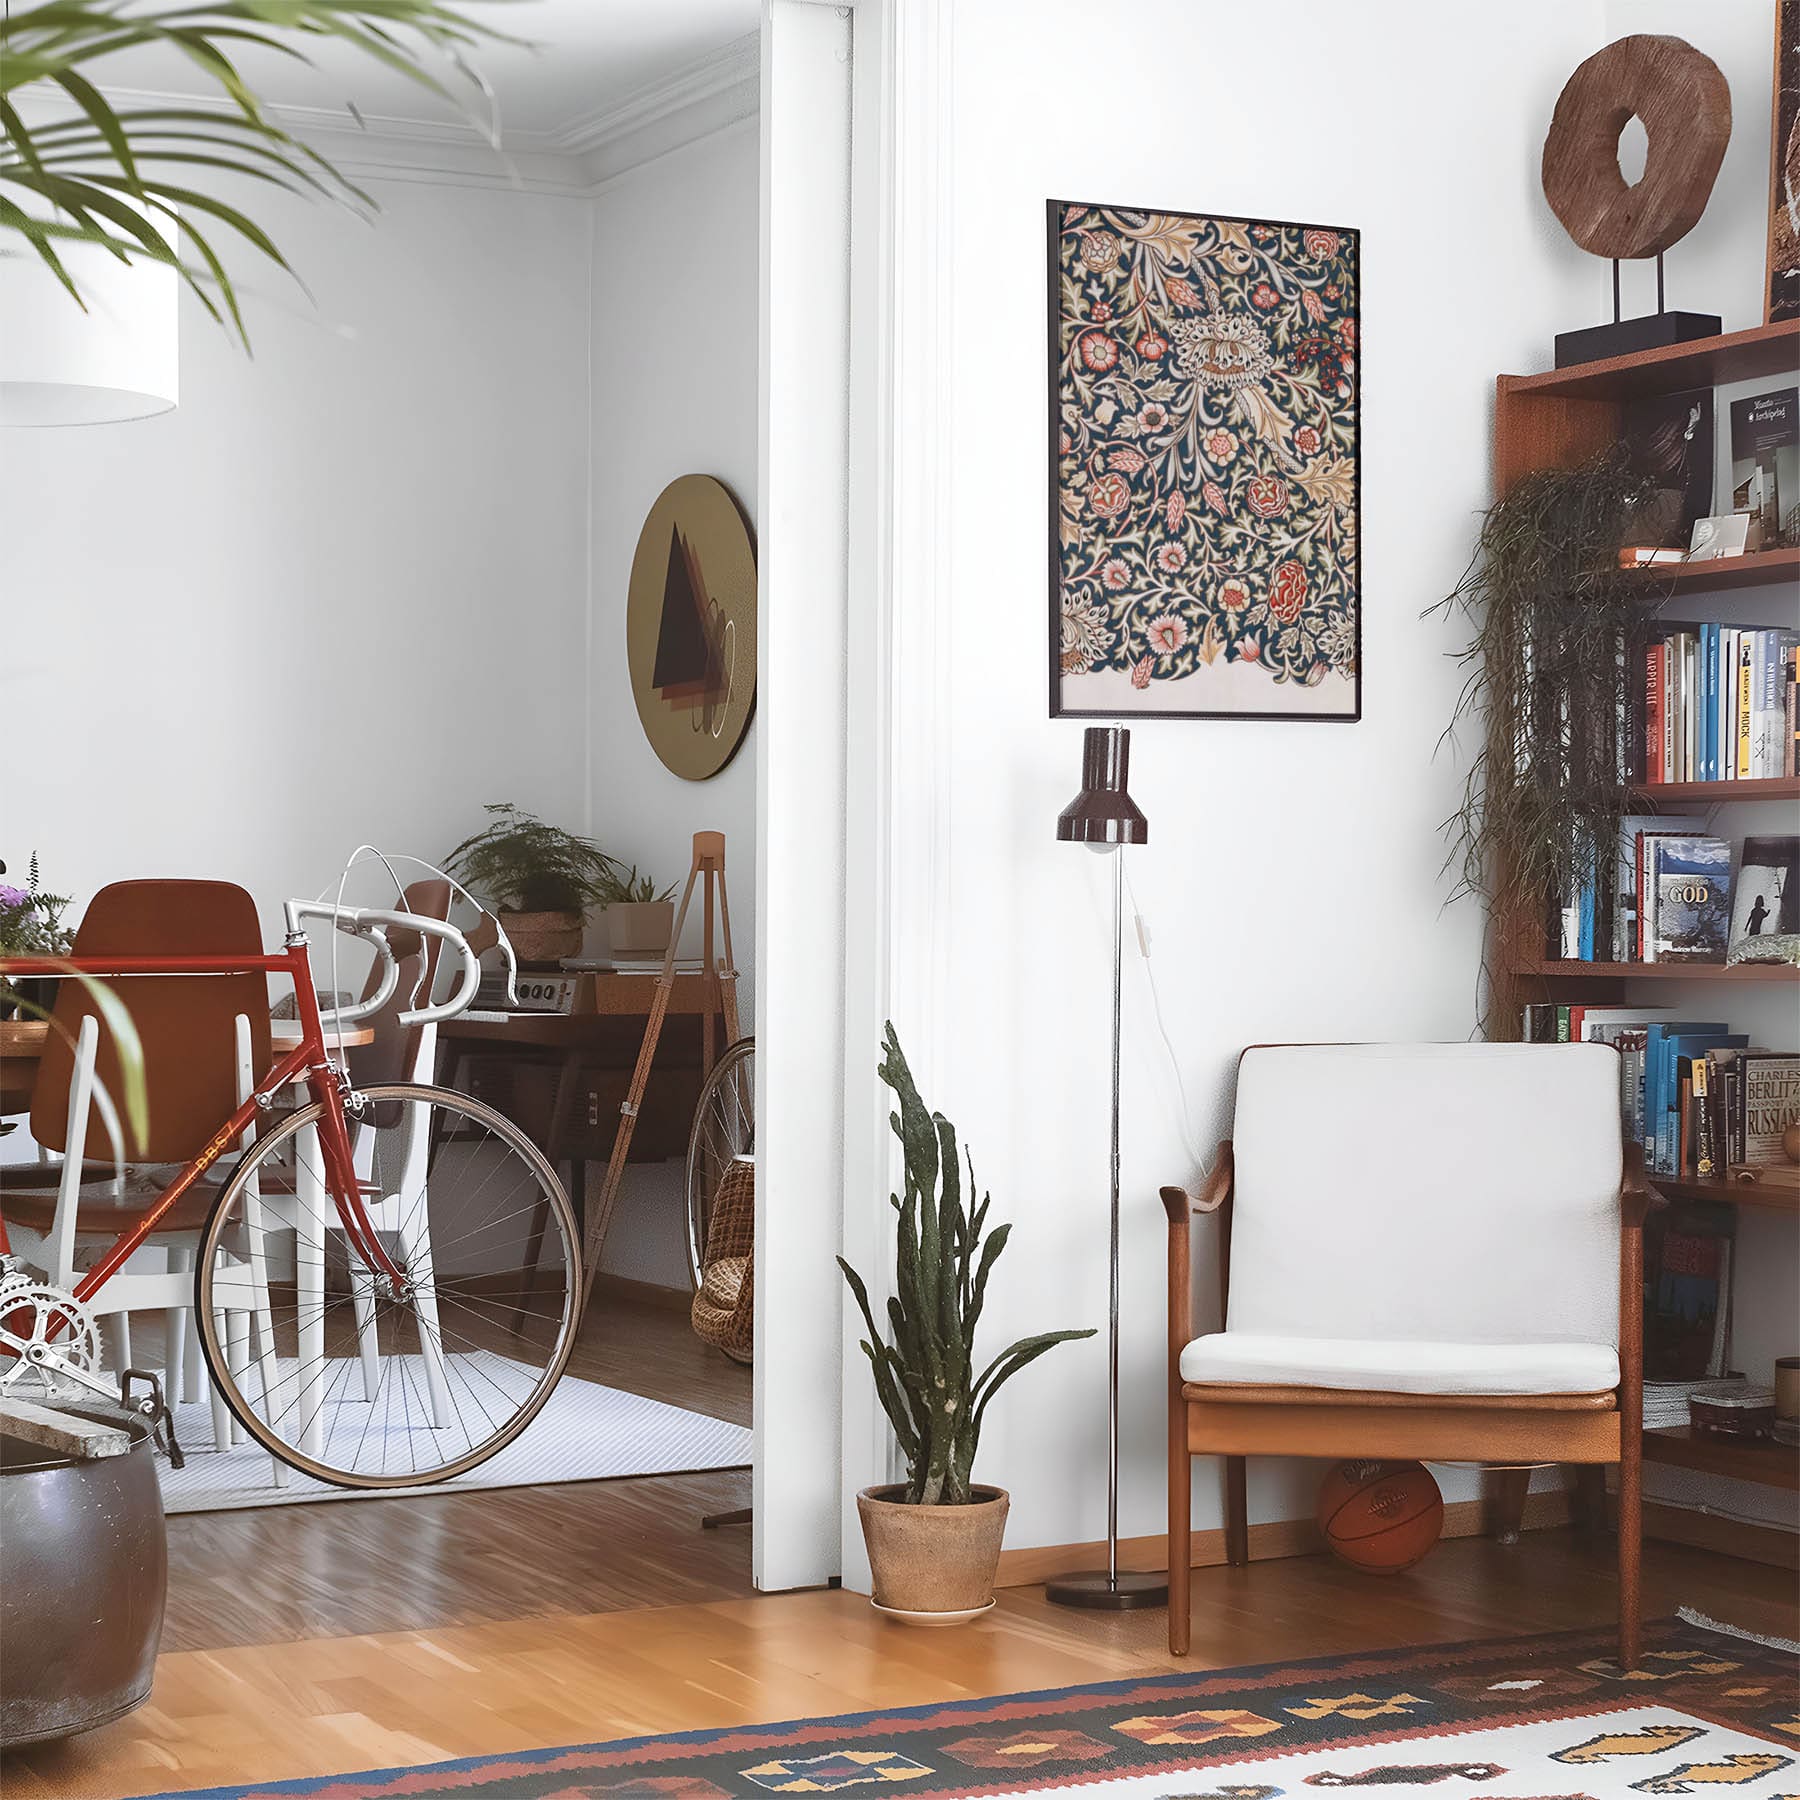 Eclectic living room with a road bike, bookshelf and house plants that features framed artwork of a Floral above a chair and lamp